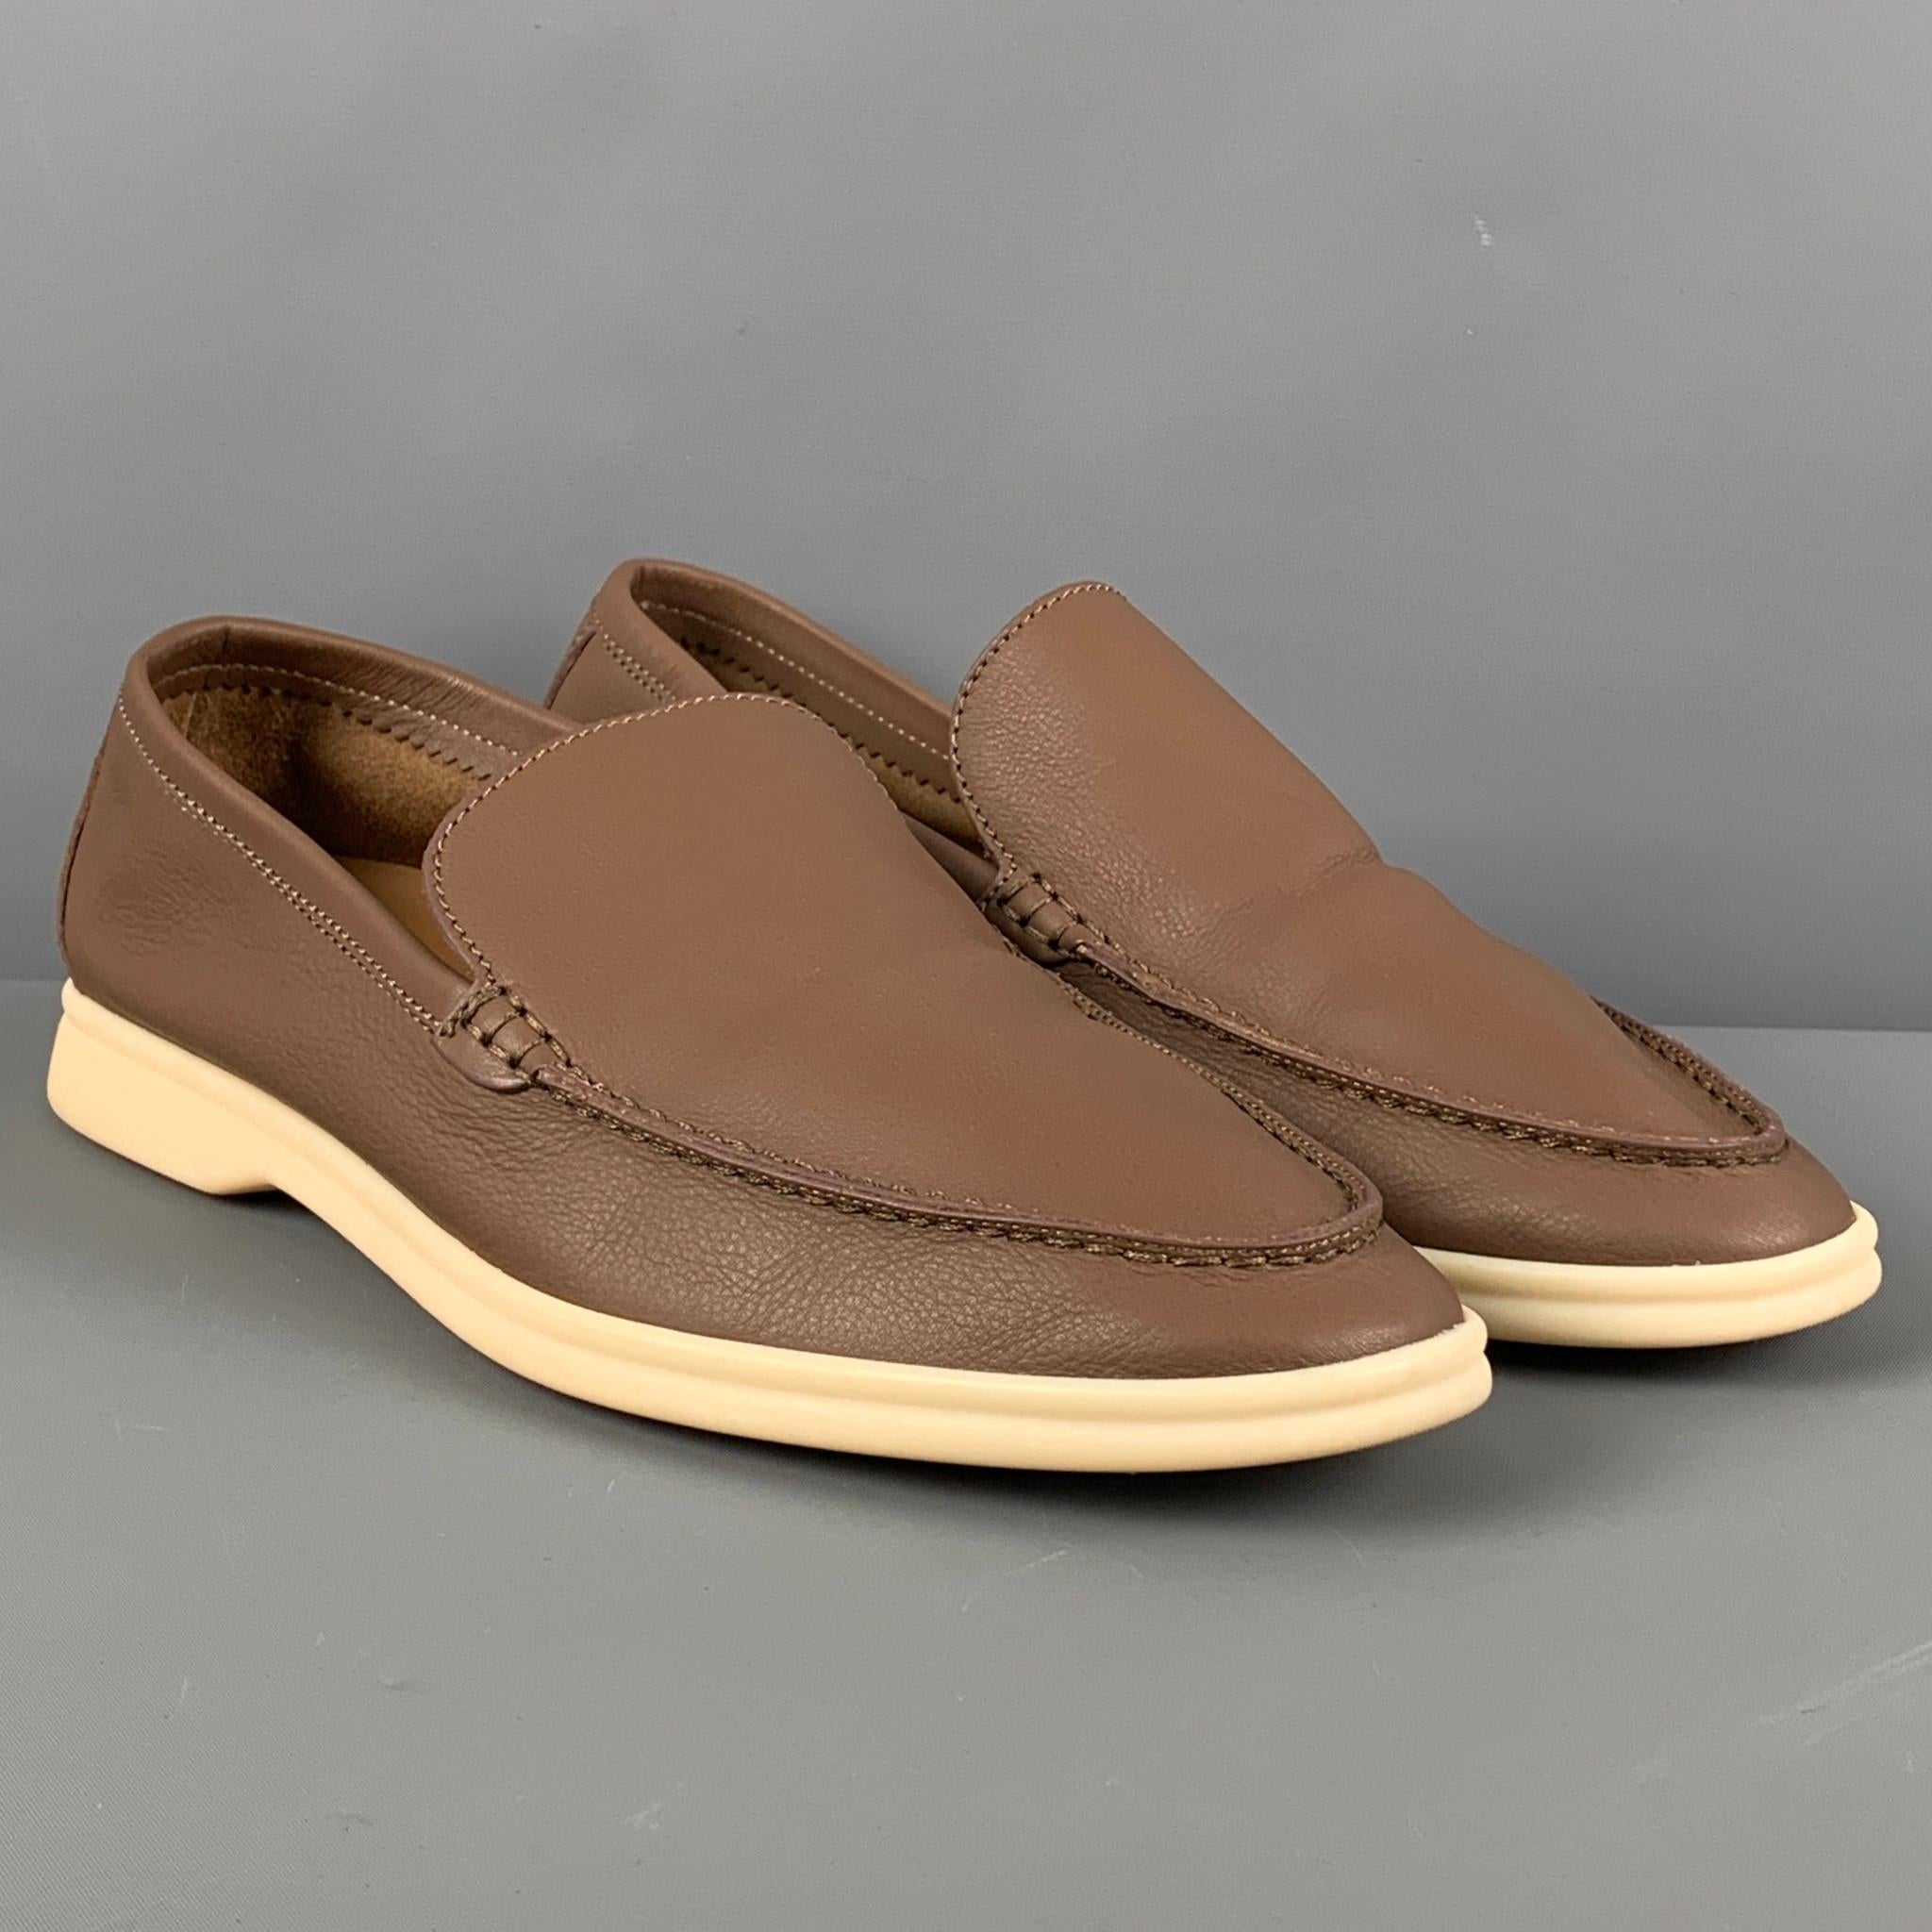 LORO PIANA loafers comes in a brown leather featuring a slip on style and a rubber sole. Made in Italy. 

Excellent Pre-Owned Condition.
Marked: 41

Outsole:11.25 in. x 4 in.